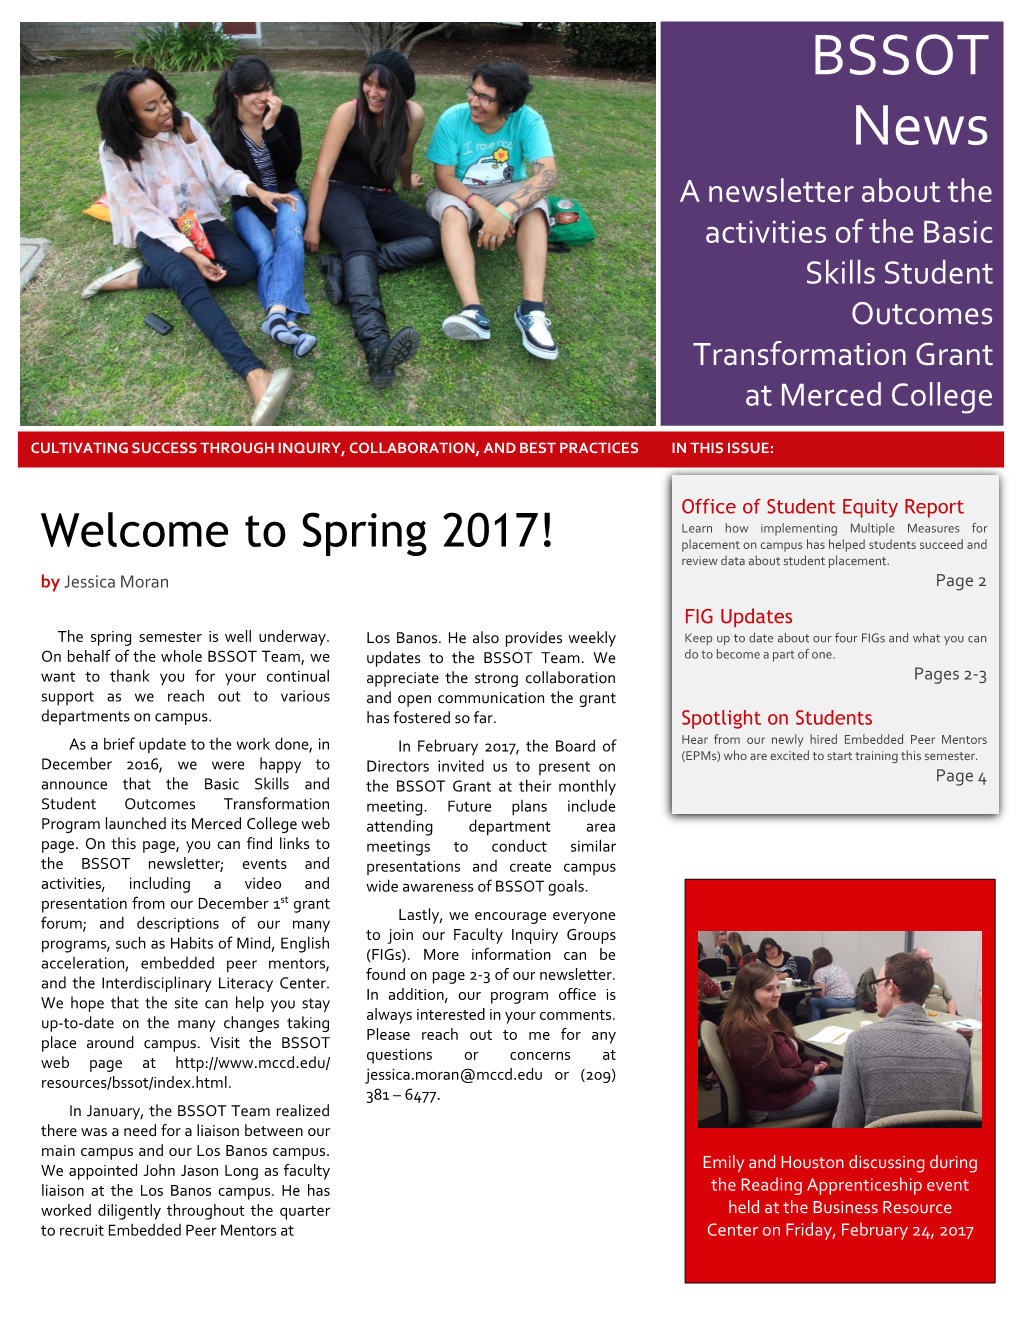 BSSOT News a Newsletter About the Activities of the Basic Skills Student Outcomes Transformation Grant at Merced College